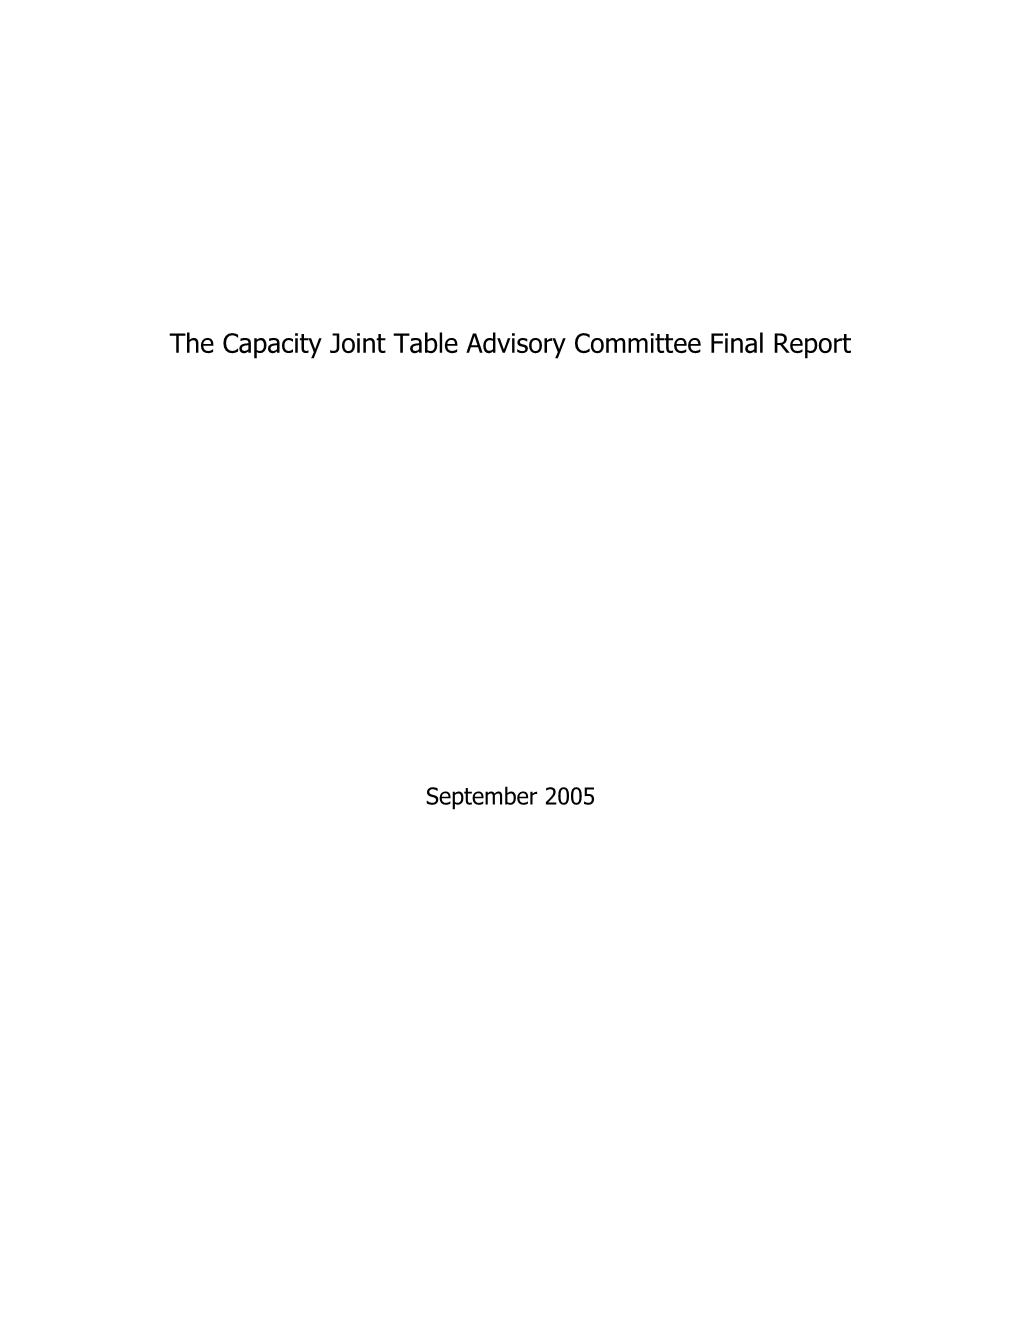 The Capacity Joint Table Advisory Committee Final Report